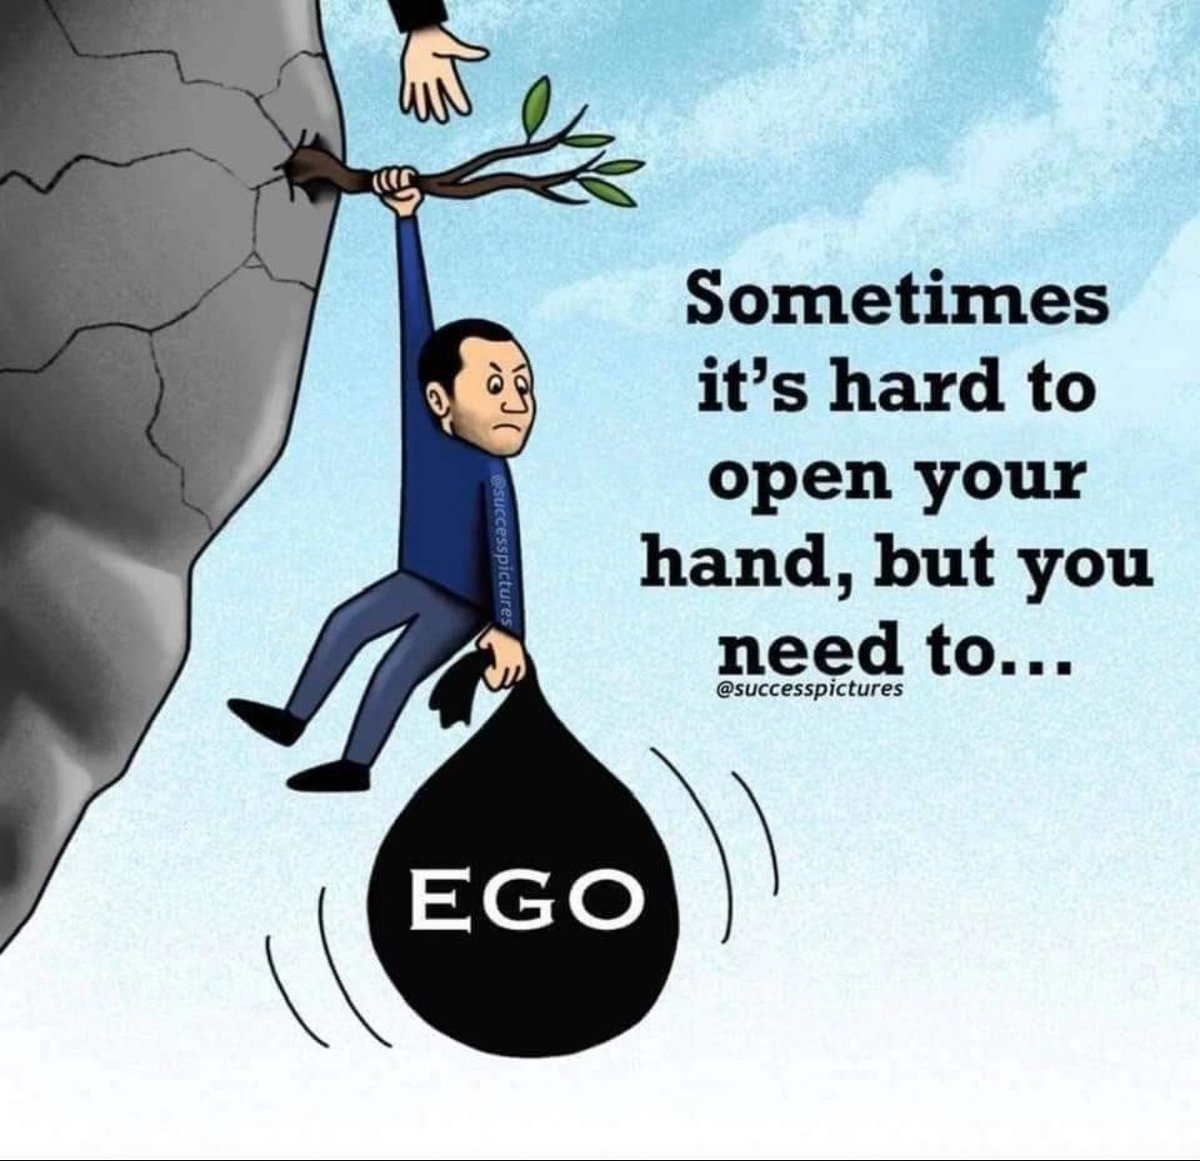 '🌟 Don't let your ego be the captain of your ship 🚢 Instead, let humility navigate you towards success ⚓️ #EgoVsHumility #StayGrounded #FindBalance'